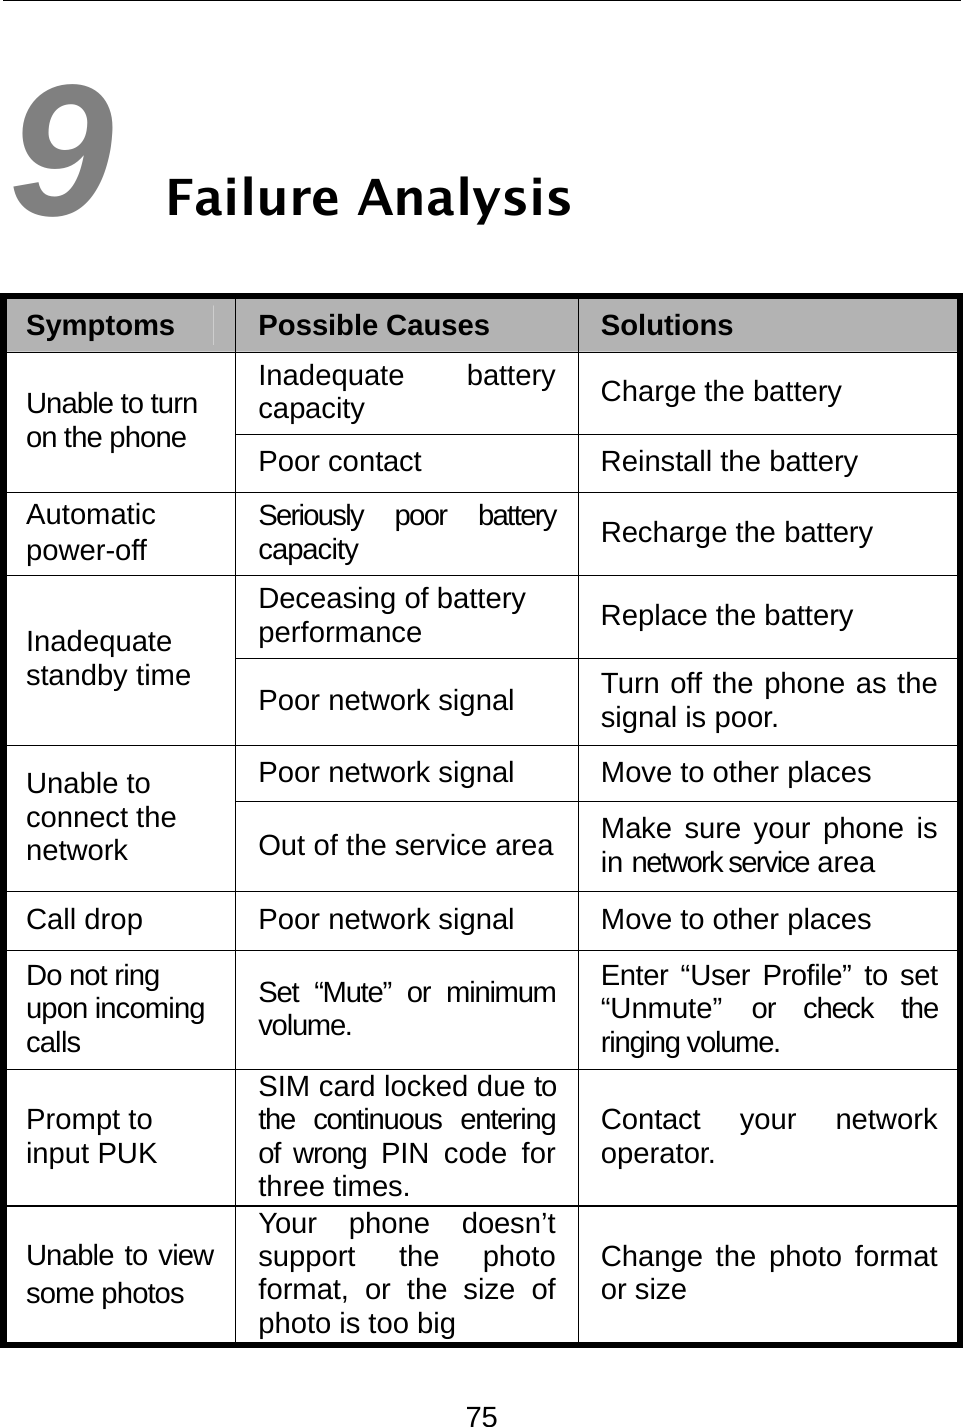  75 9 Failure Analysis Symptoms  Possible Causes  Solutions Inadequate battery capacity  Charge the battery Unable to turn on the phone  Poor contact  Reinstall the battery Automatic power-off  Seriously poor battery capacity  Recharge the battery Deceasing of battery performance   Replace the battery Inadequate standby time  Poor network signal  Turn off the phone as the signal is poor. Poor network signal  Move to other places Unable to connect the network   Out of the service area Make sure your phone is in network service area Call drop  Poor network signal  Move to other places Do not ring upon incoming calls Set “Mute” or minimum volume. Enter “User Profile” to set “Unmute” or check the ringing volume. Prompt to input PUK SIM card locked due to the continuous entering of wrong PIN code for three times. Contact your network operator. Unable to view some photos   Your phone doesn’t support the photo format, or the size of photo is too big   Change the photo format or size   